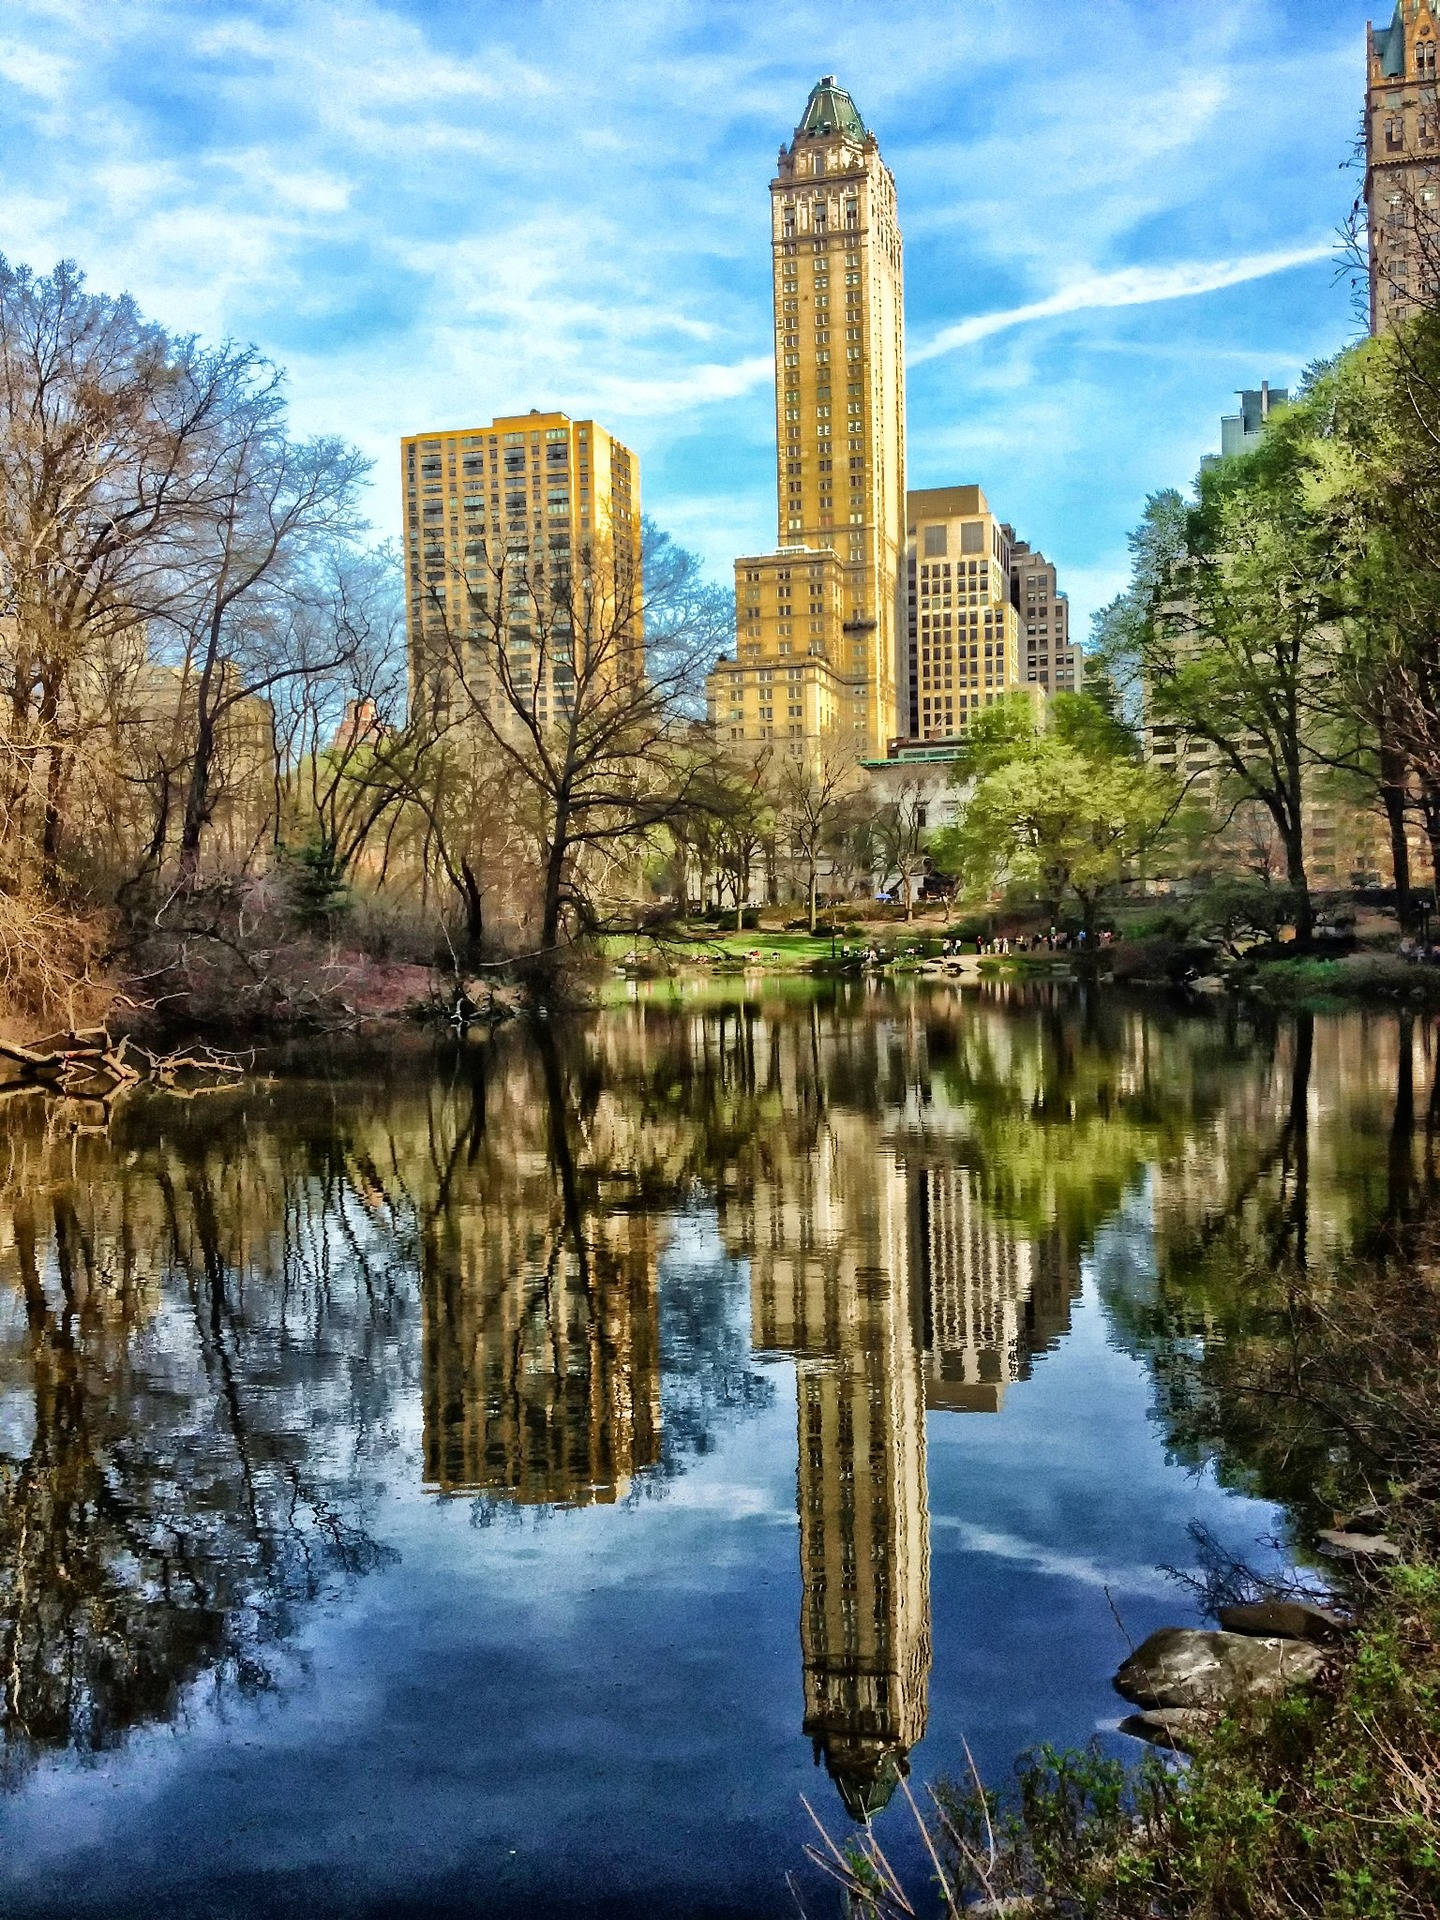 Building Reflection In Central Park Wallpaper